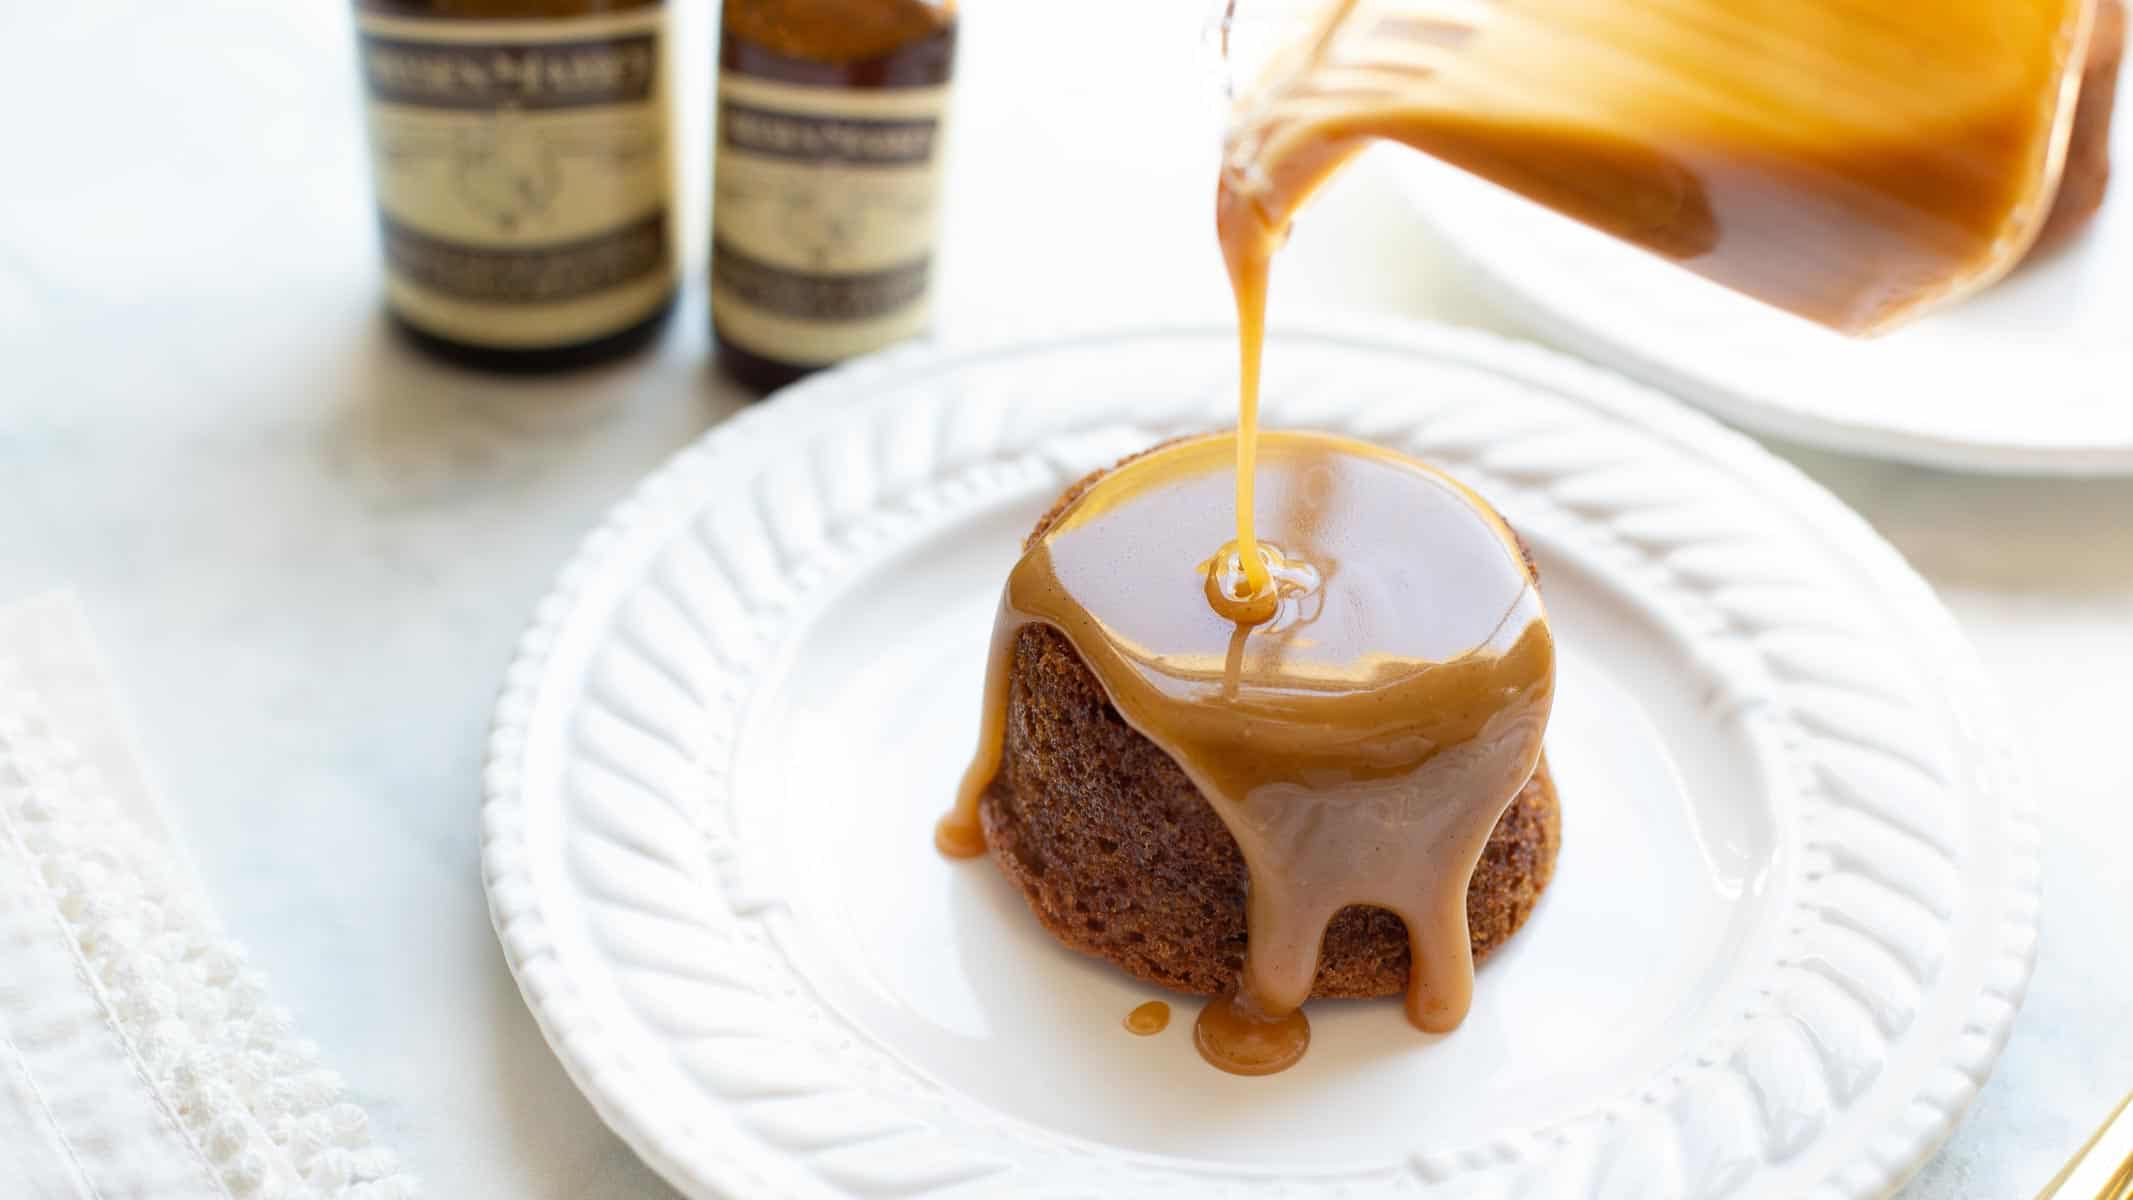 caramel sauce being poured over toffee pudding on white plate